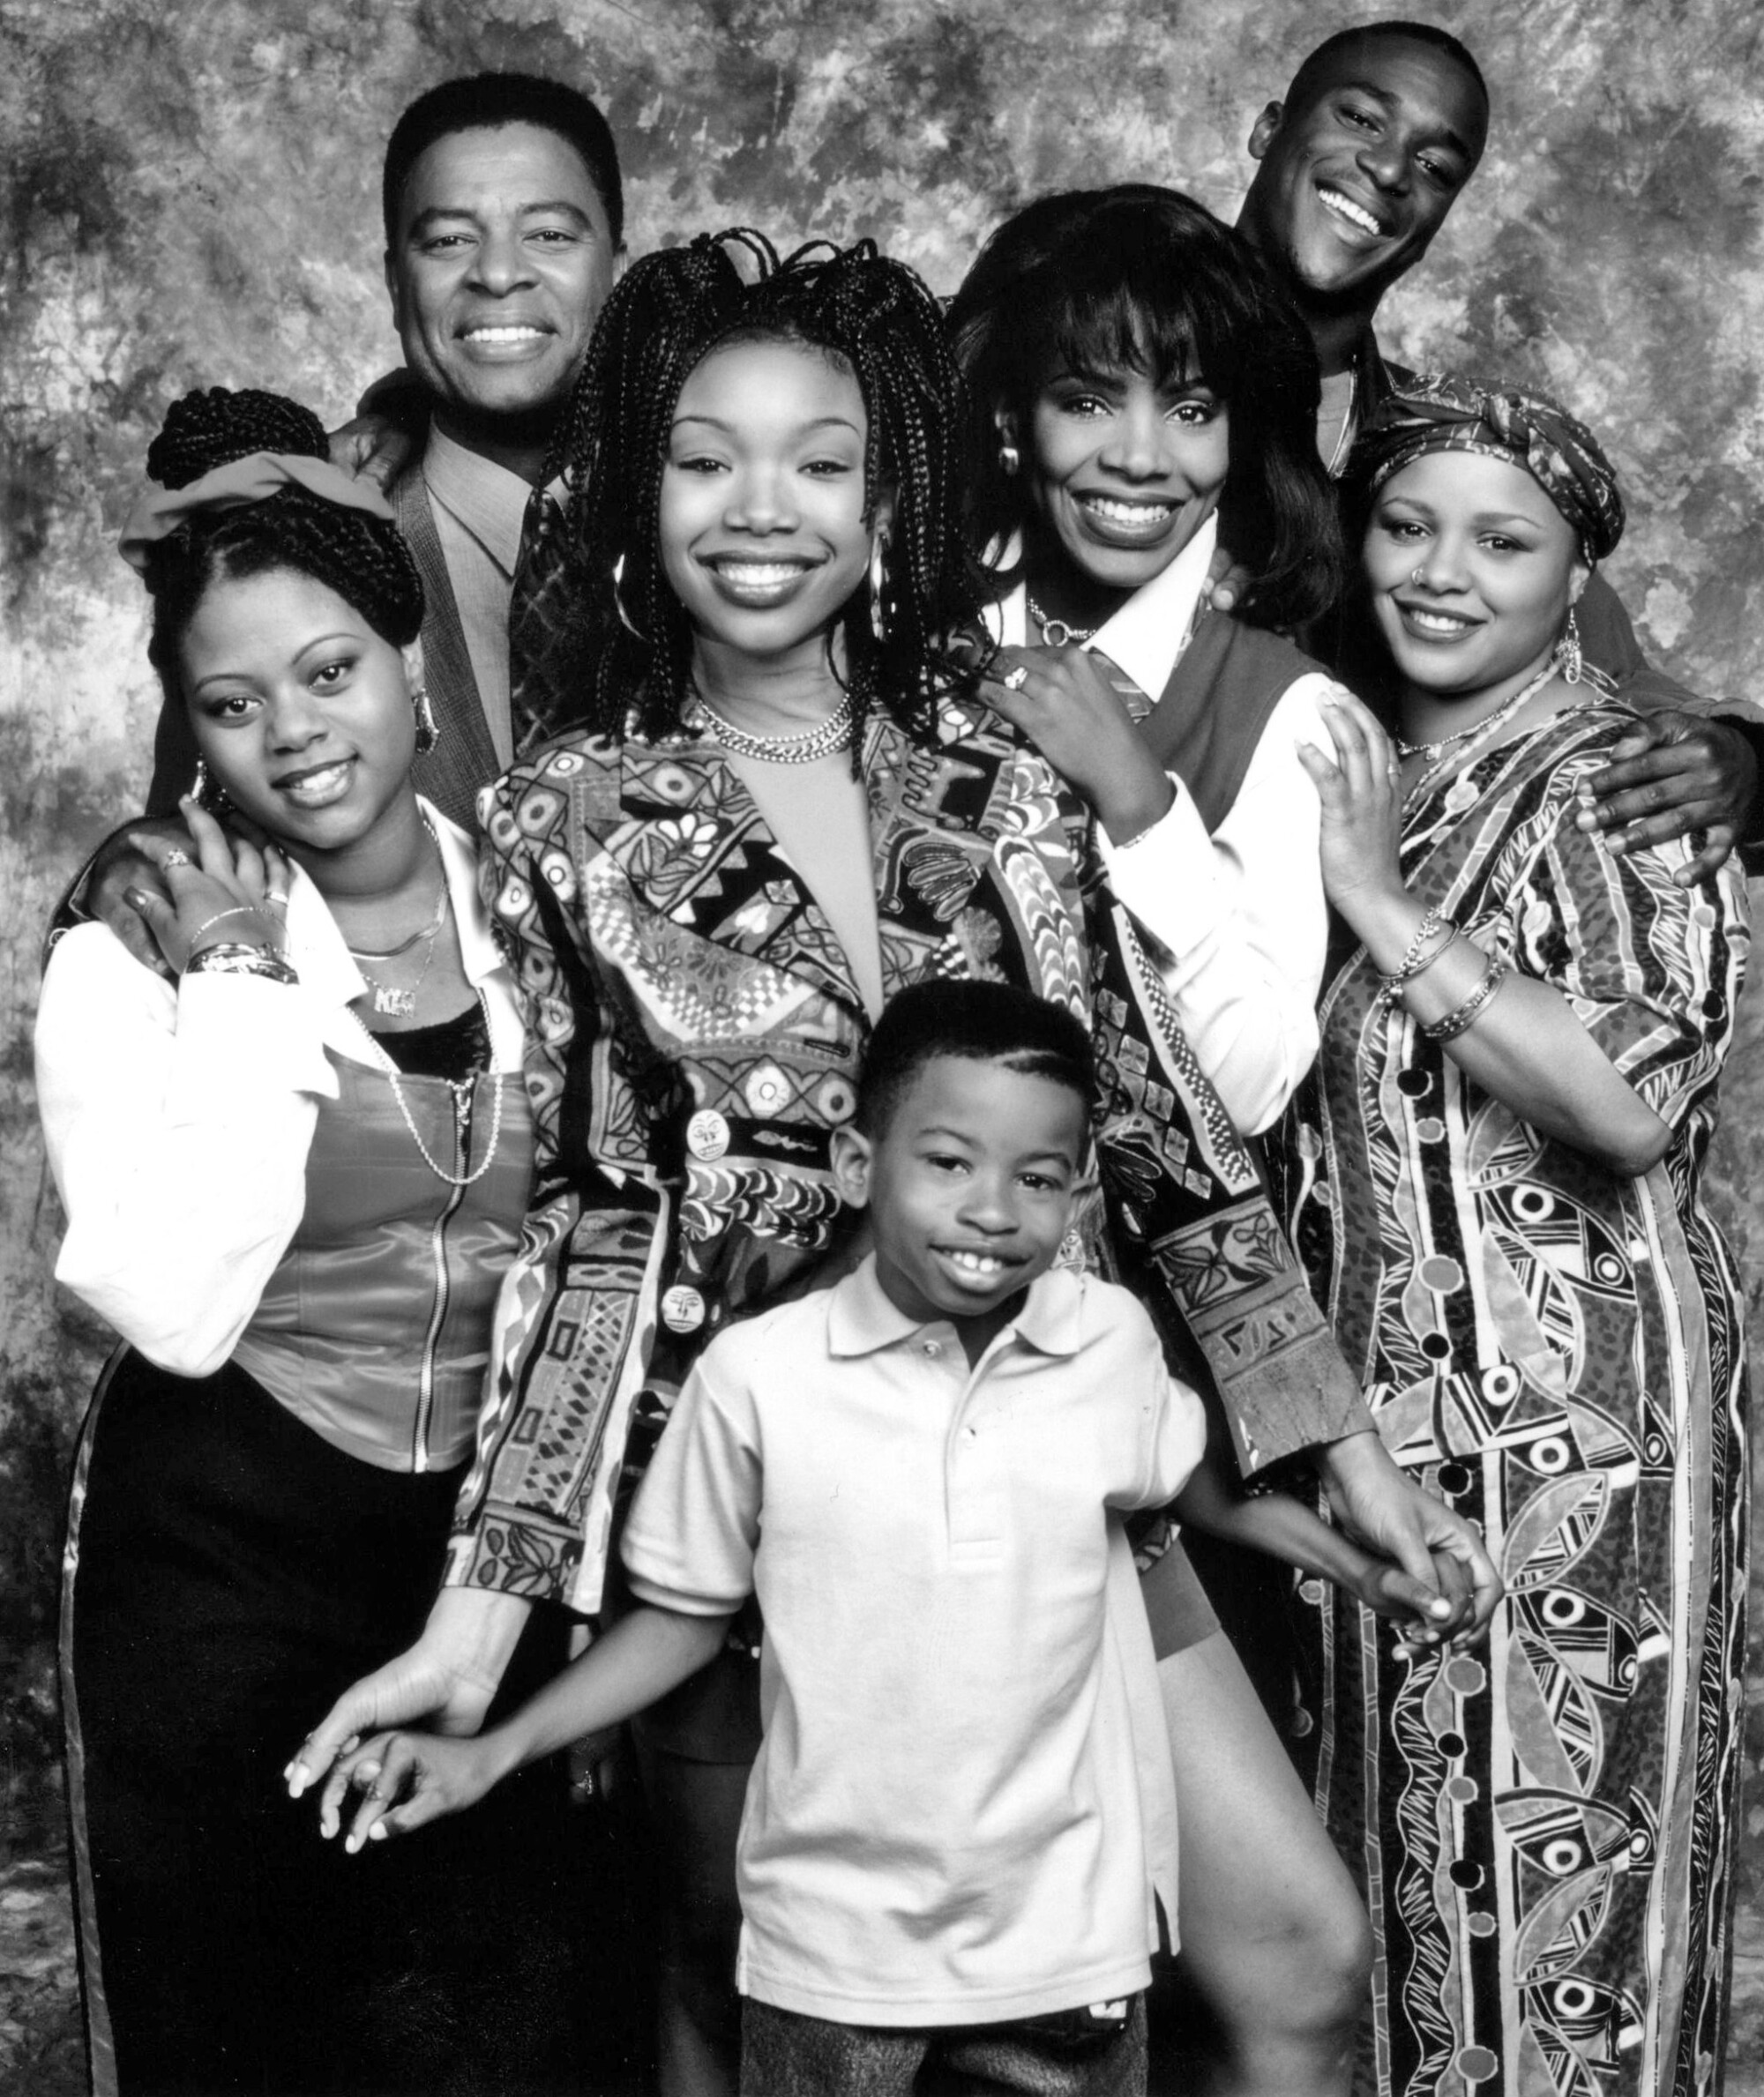 The cast for TV show "Moesha" in 1995, a smiling group of people of varying ages